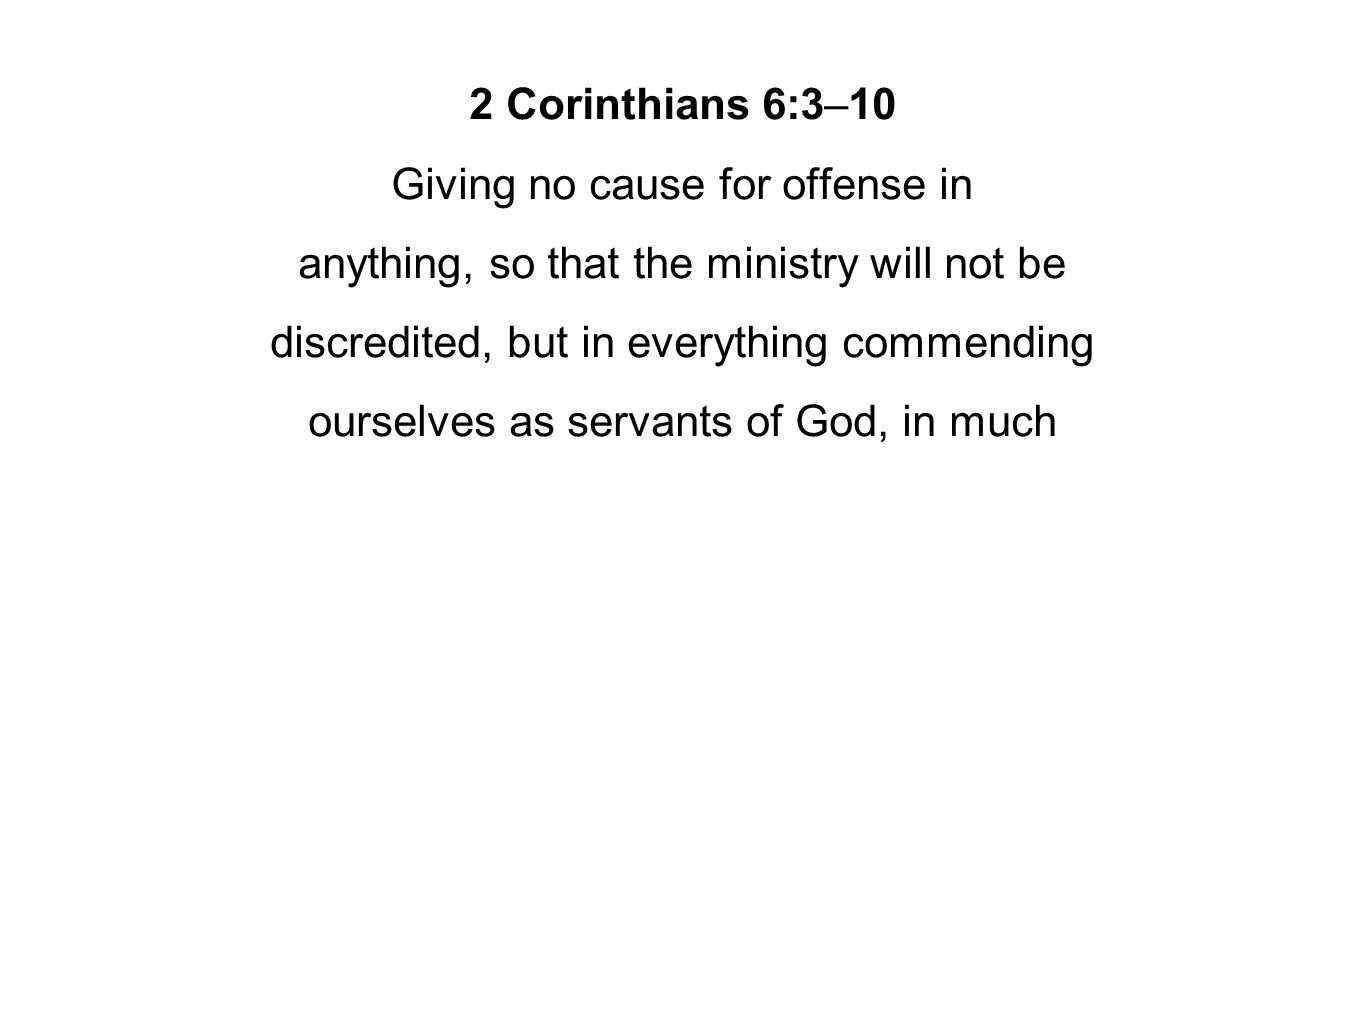 2 Corinthians 6:3–10 Giving no cause for offense in anything, so that the ministry will not be discredited, but in everything commending ourselves as servants of God, in much